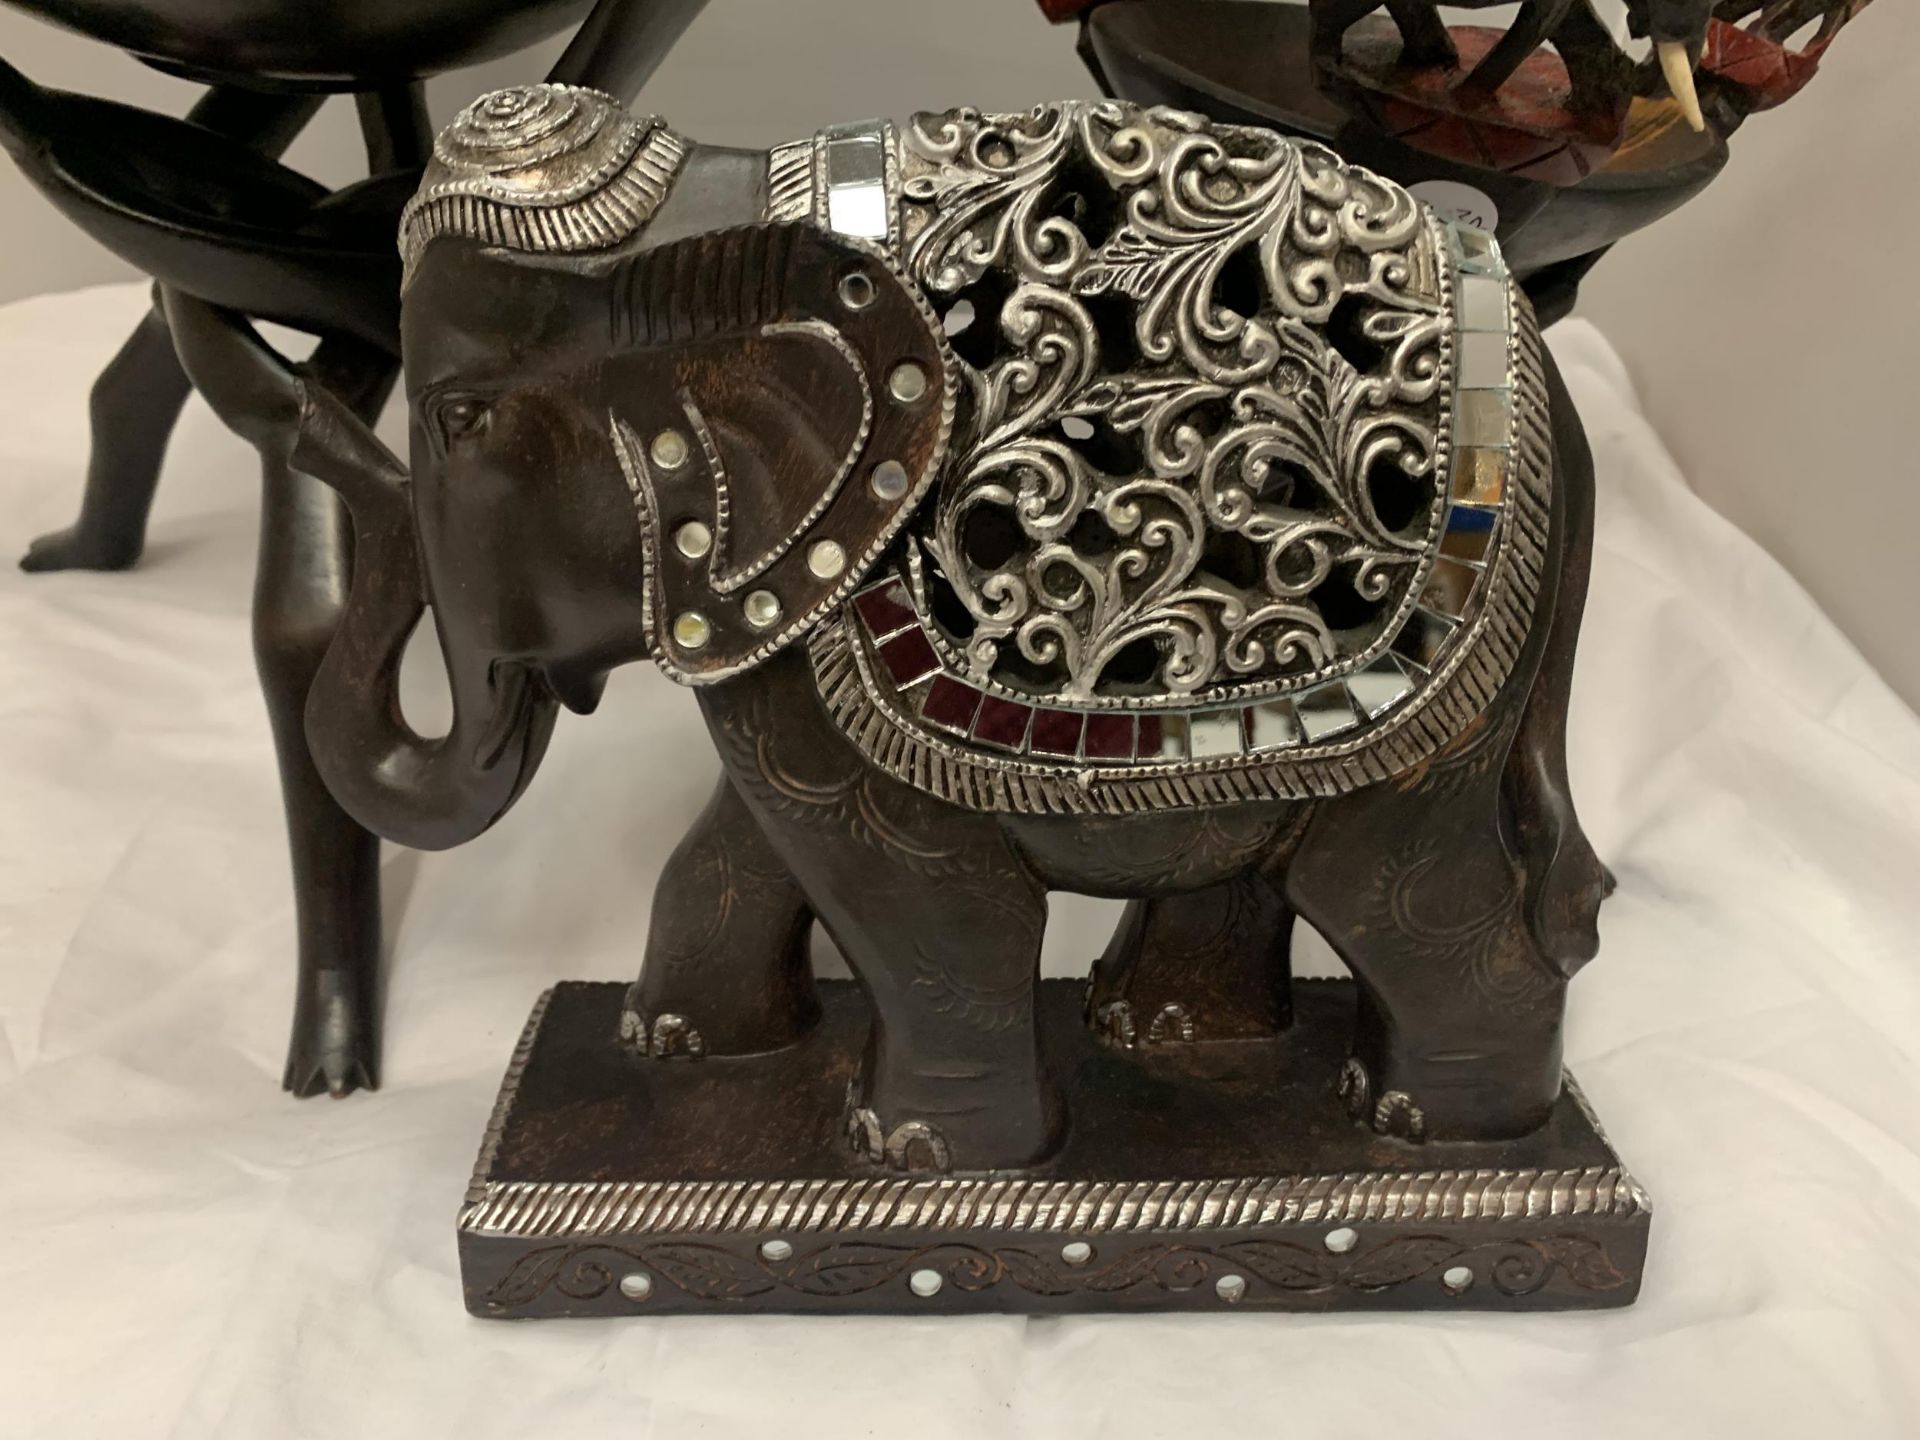 THREE ELEPHANT THEMED ITEMS TO INCLUDE TWO BOWLS ON TRIPOD LEGS AND A HIGHLY DECORATIVE WOODEN - Image 2 of 5